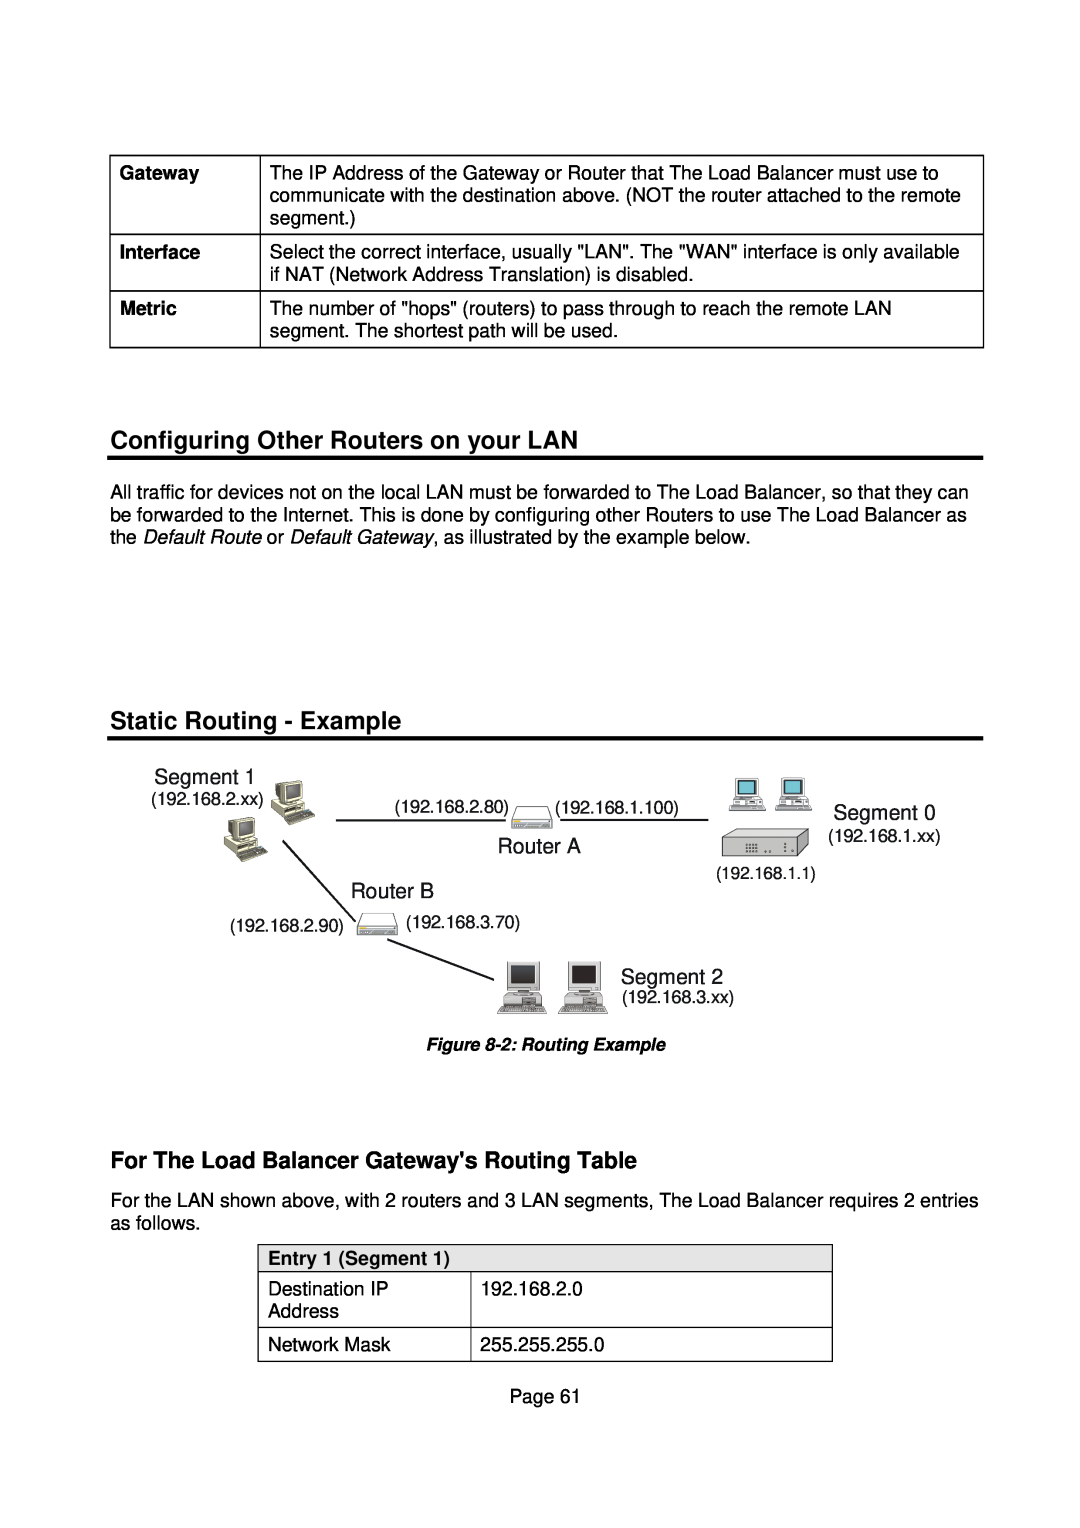 Edimax Technology Edimax user guide Router manual Configuring Other Routers on your LAN, Static Routing - Example, Gateway 